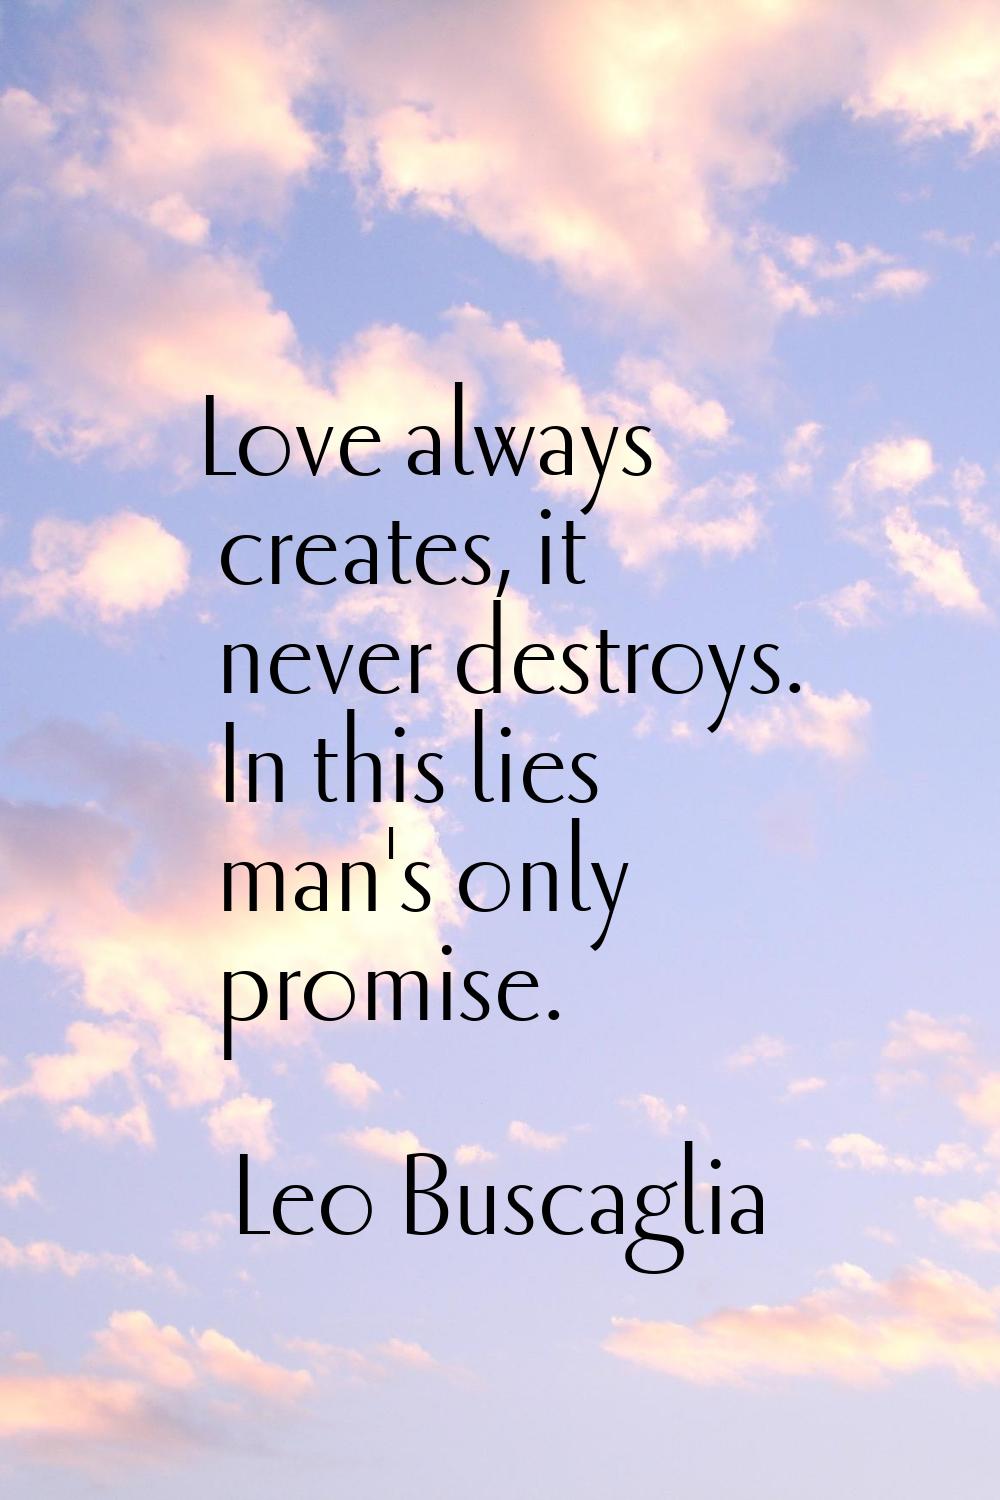 Love always creates, it never destroys. In this lies man's only promise.